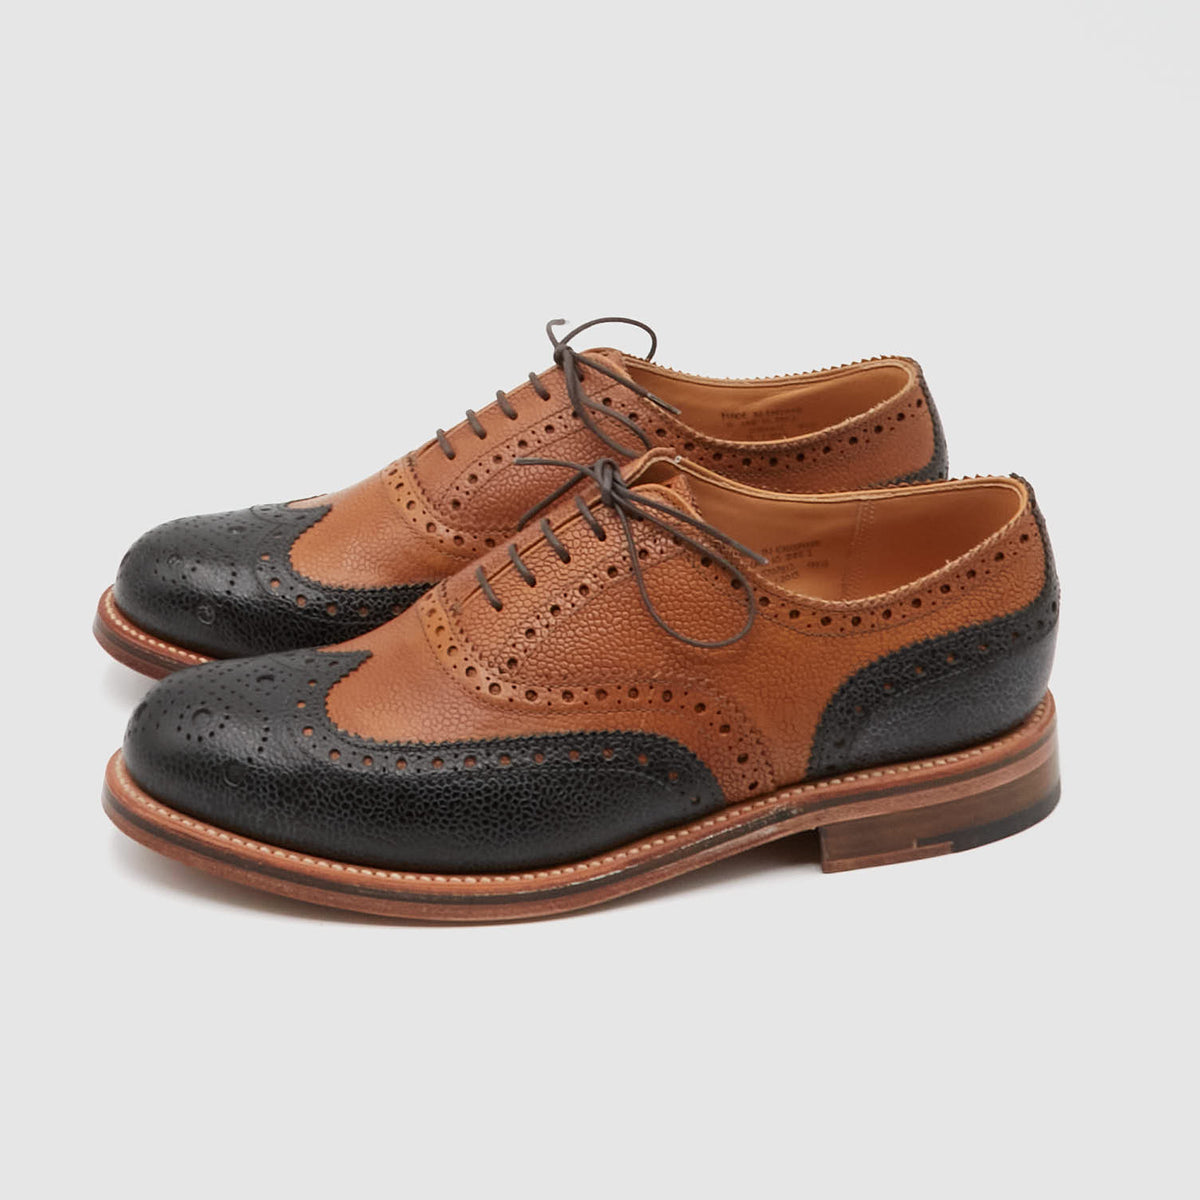 Grenson Wing Tip Brogue Shoes